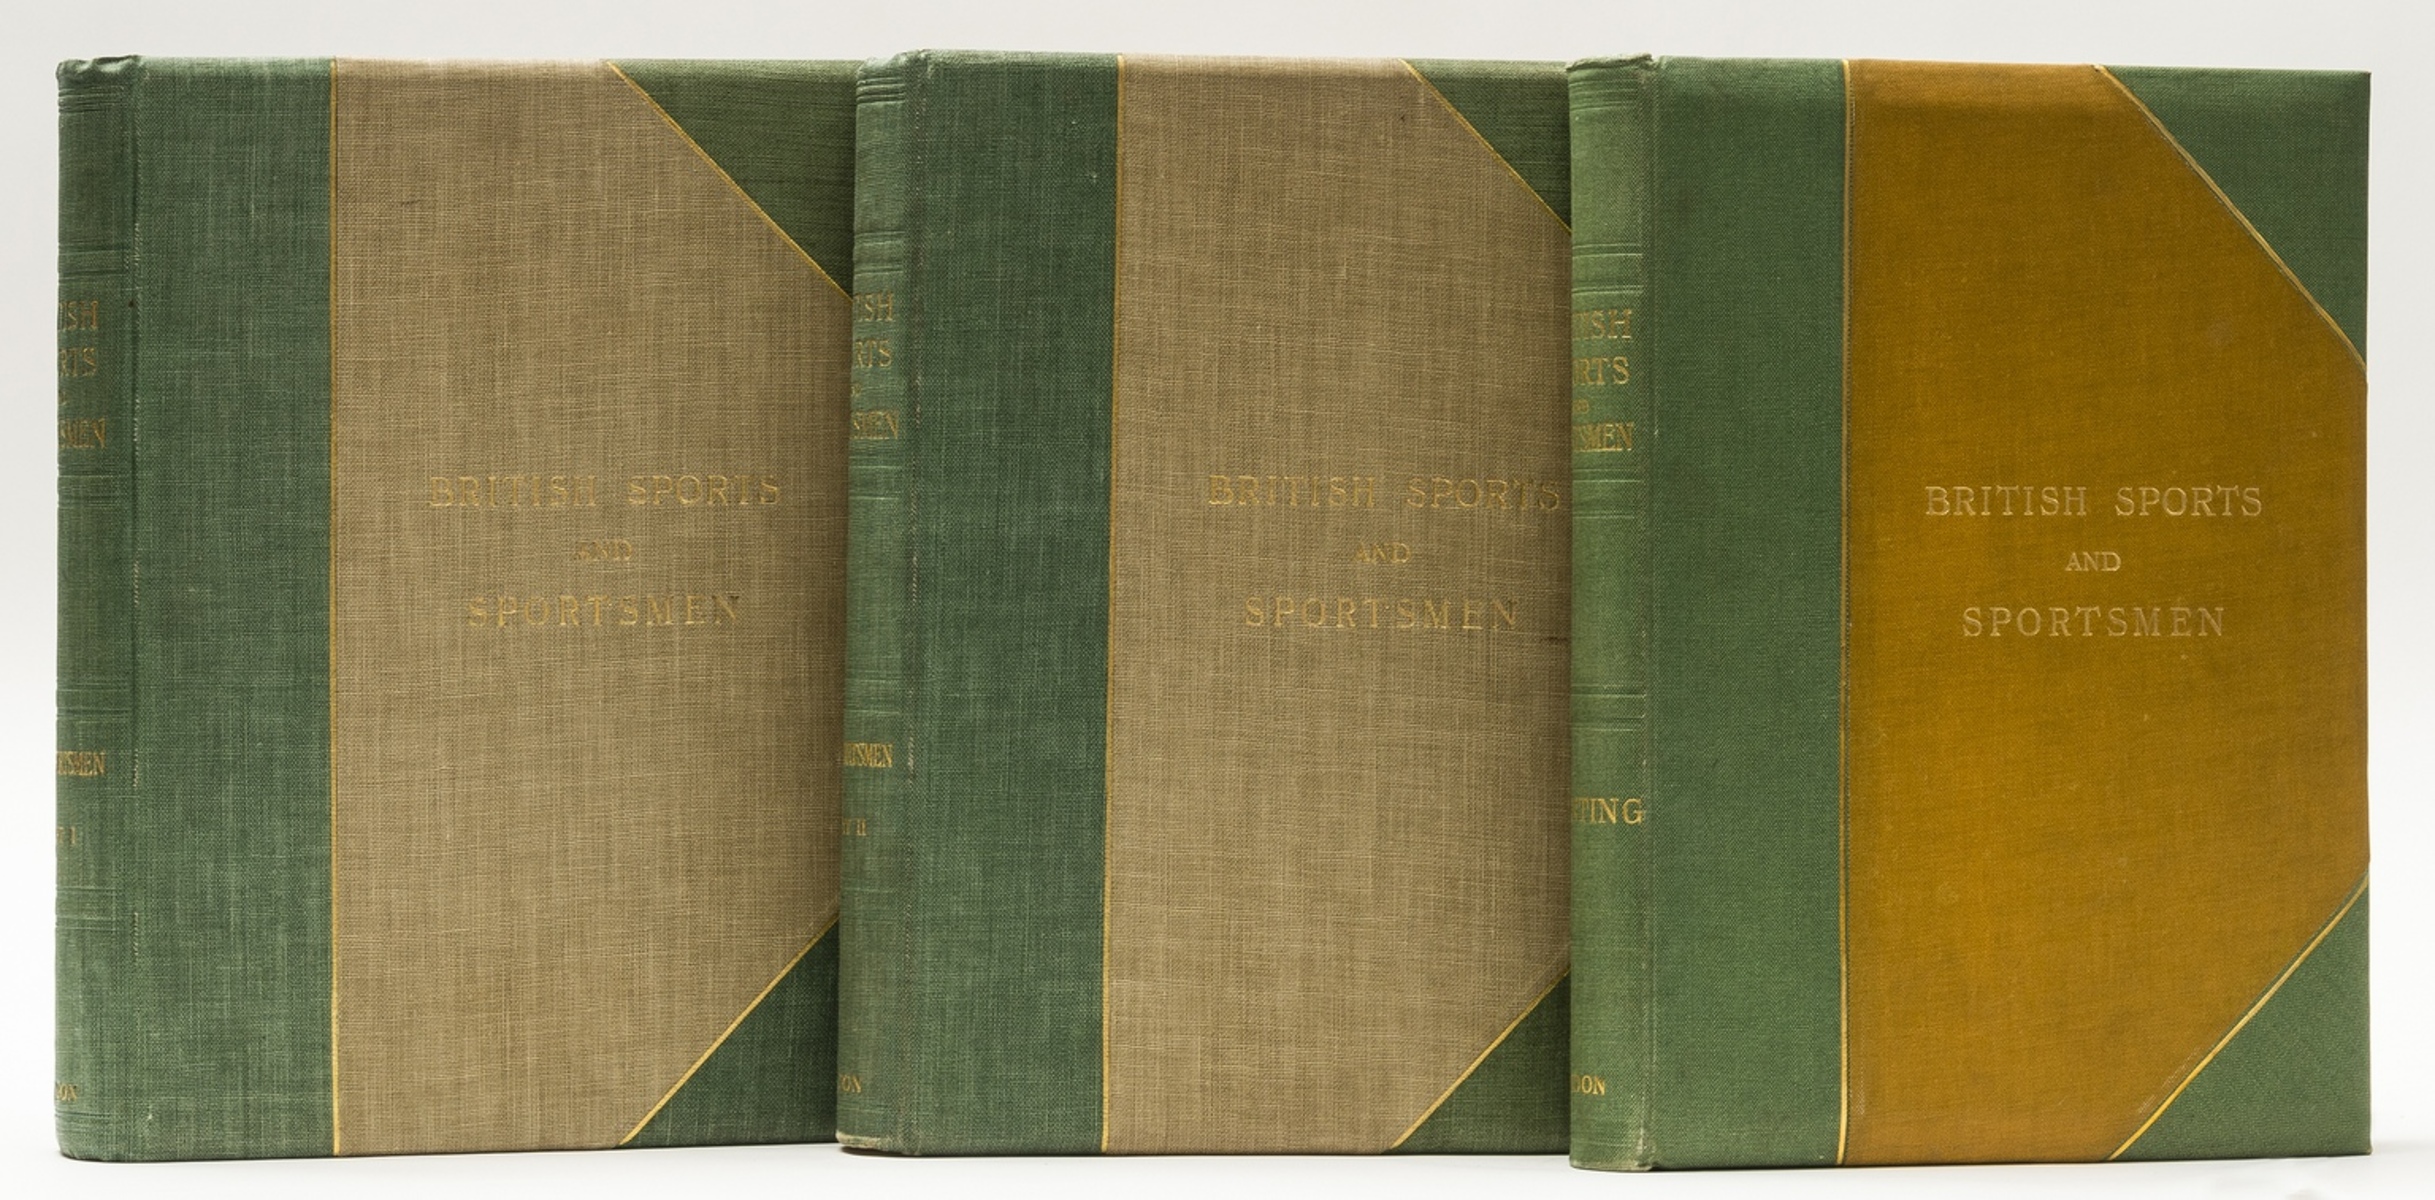 Sport.- British Sports and Sportsmen, 3 vol., limited editions of 1000, c.1912.